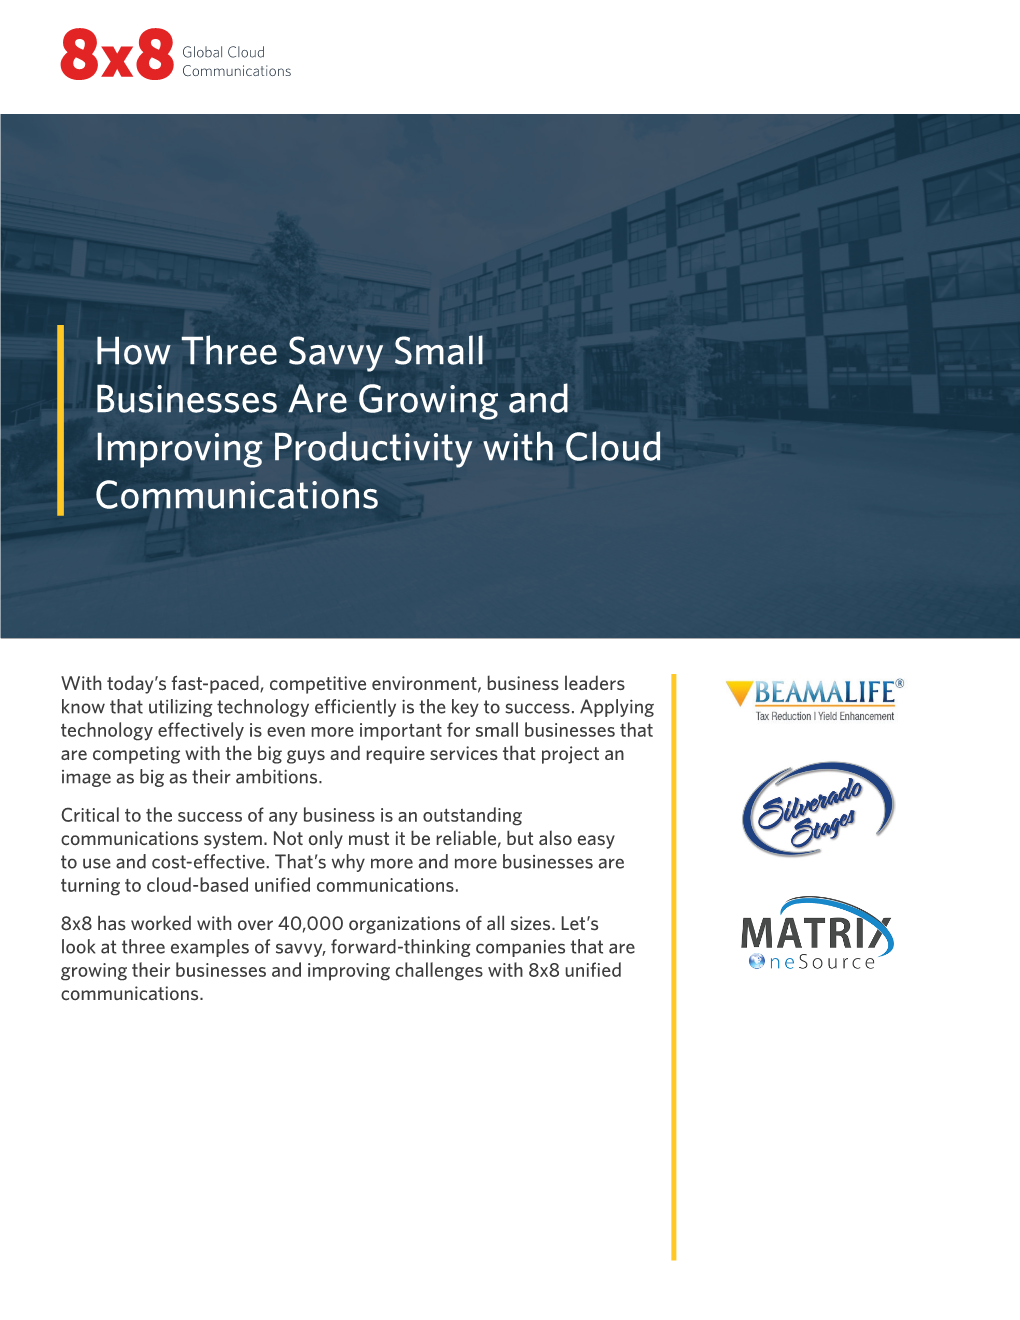 How Three Savvy Small Businesses Are Growing and Improving Productivity with Cloud Communications